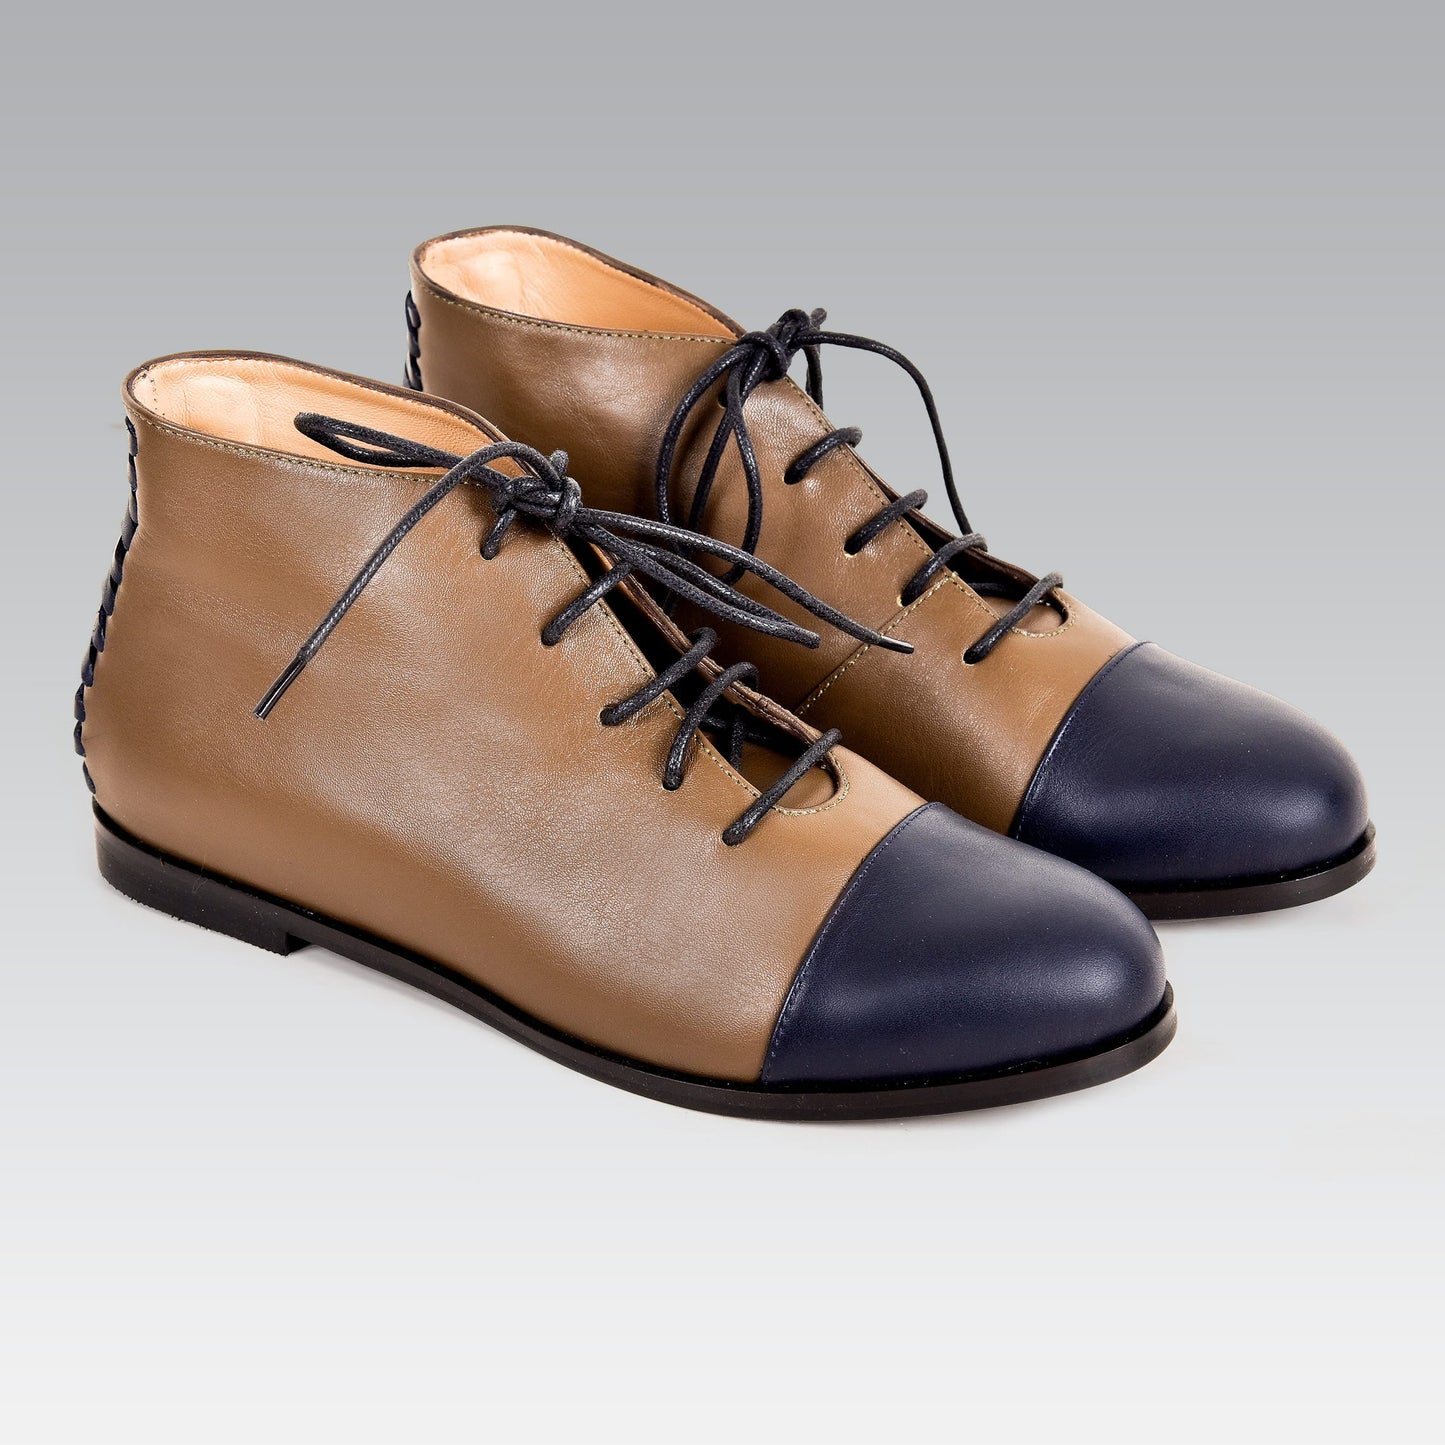 Dar Ankle Boot | Greige & Navy Calfskin Leather